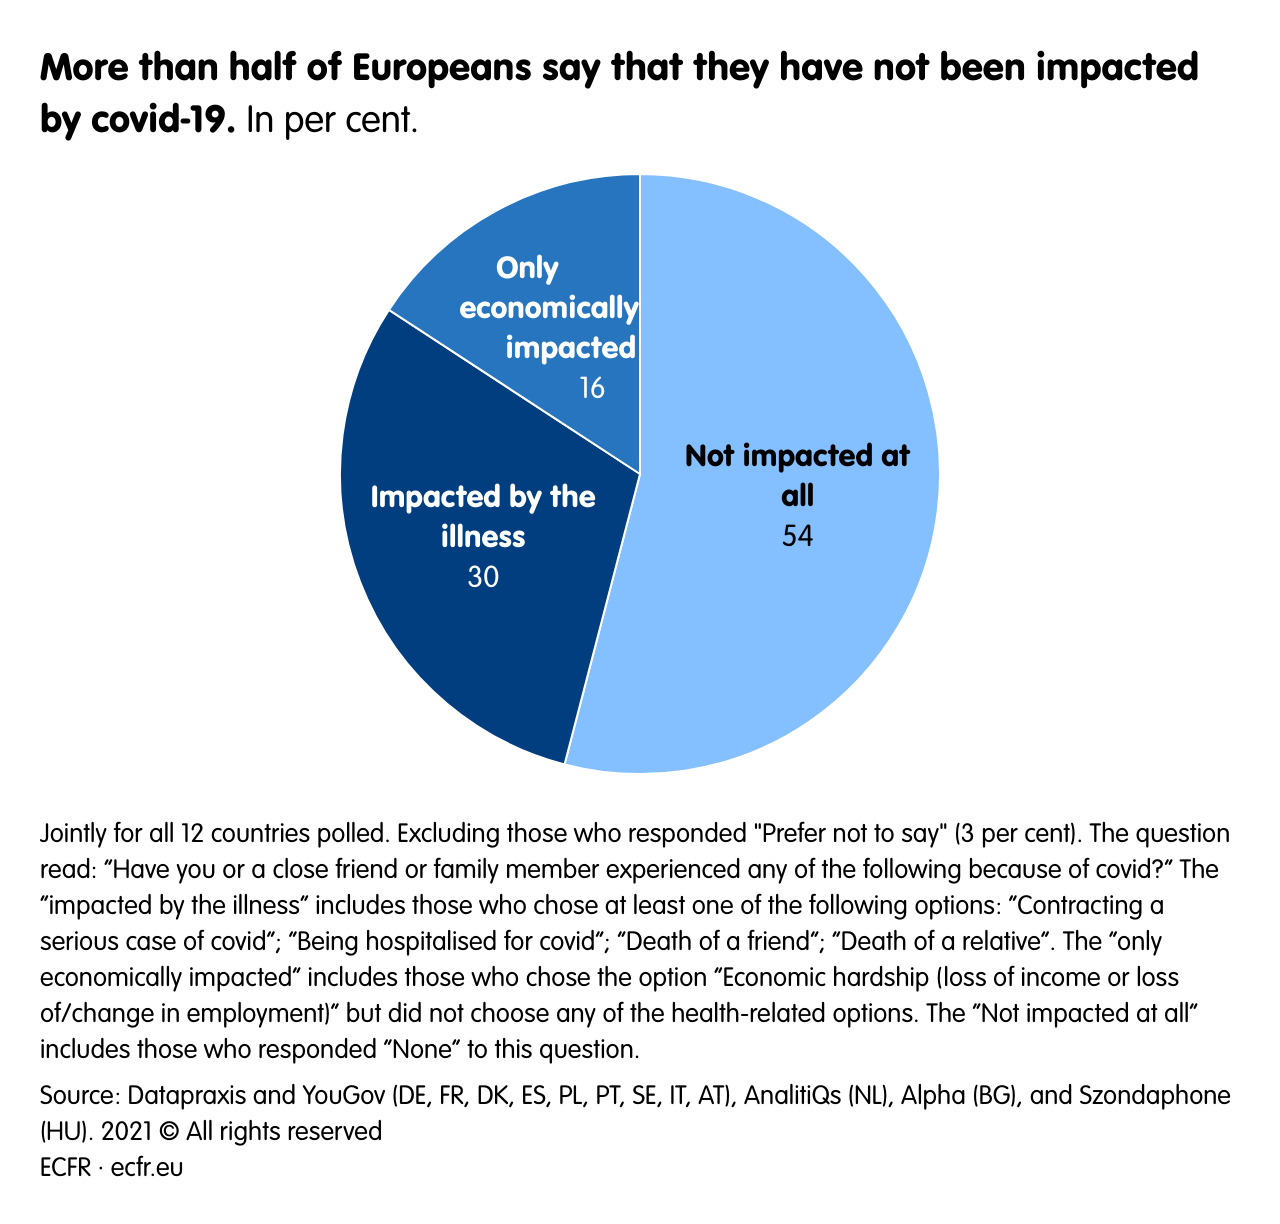 More than half of Europeans say that they have not been  impacted by covid-19.